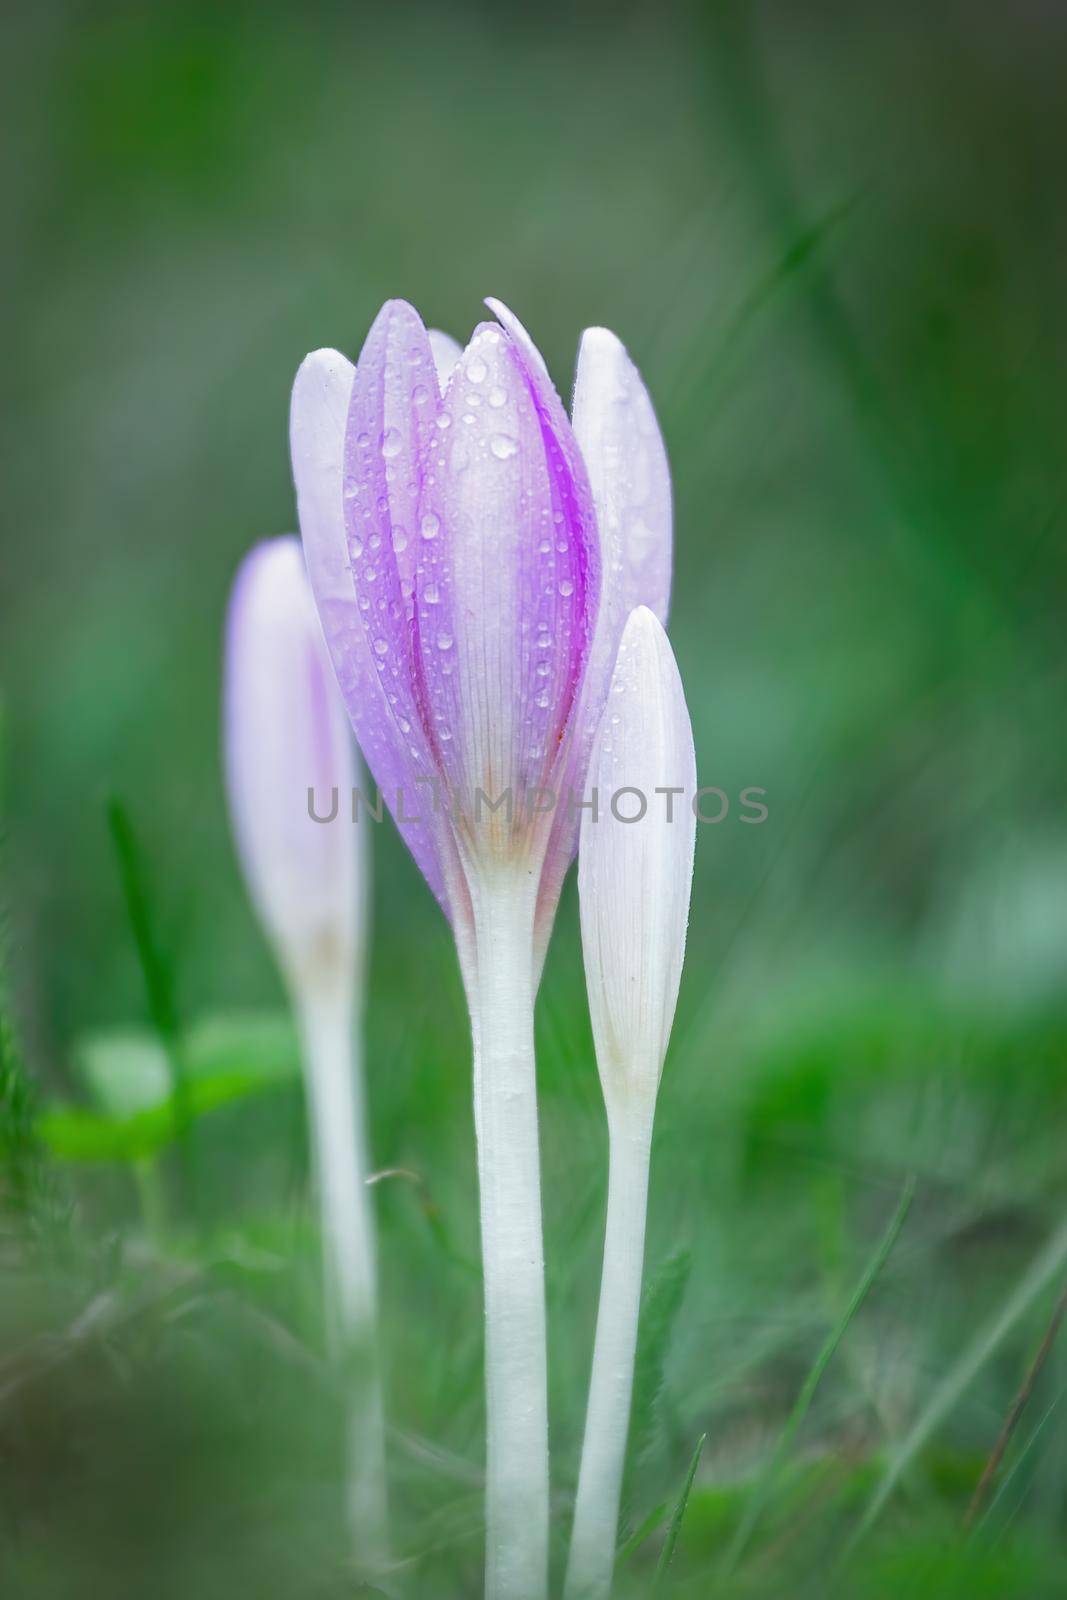 Nice dewy flower in the autumn (Colchicum autumnale) by Digoarpi